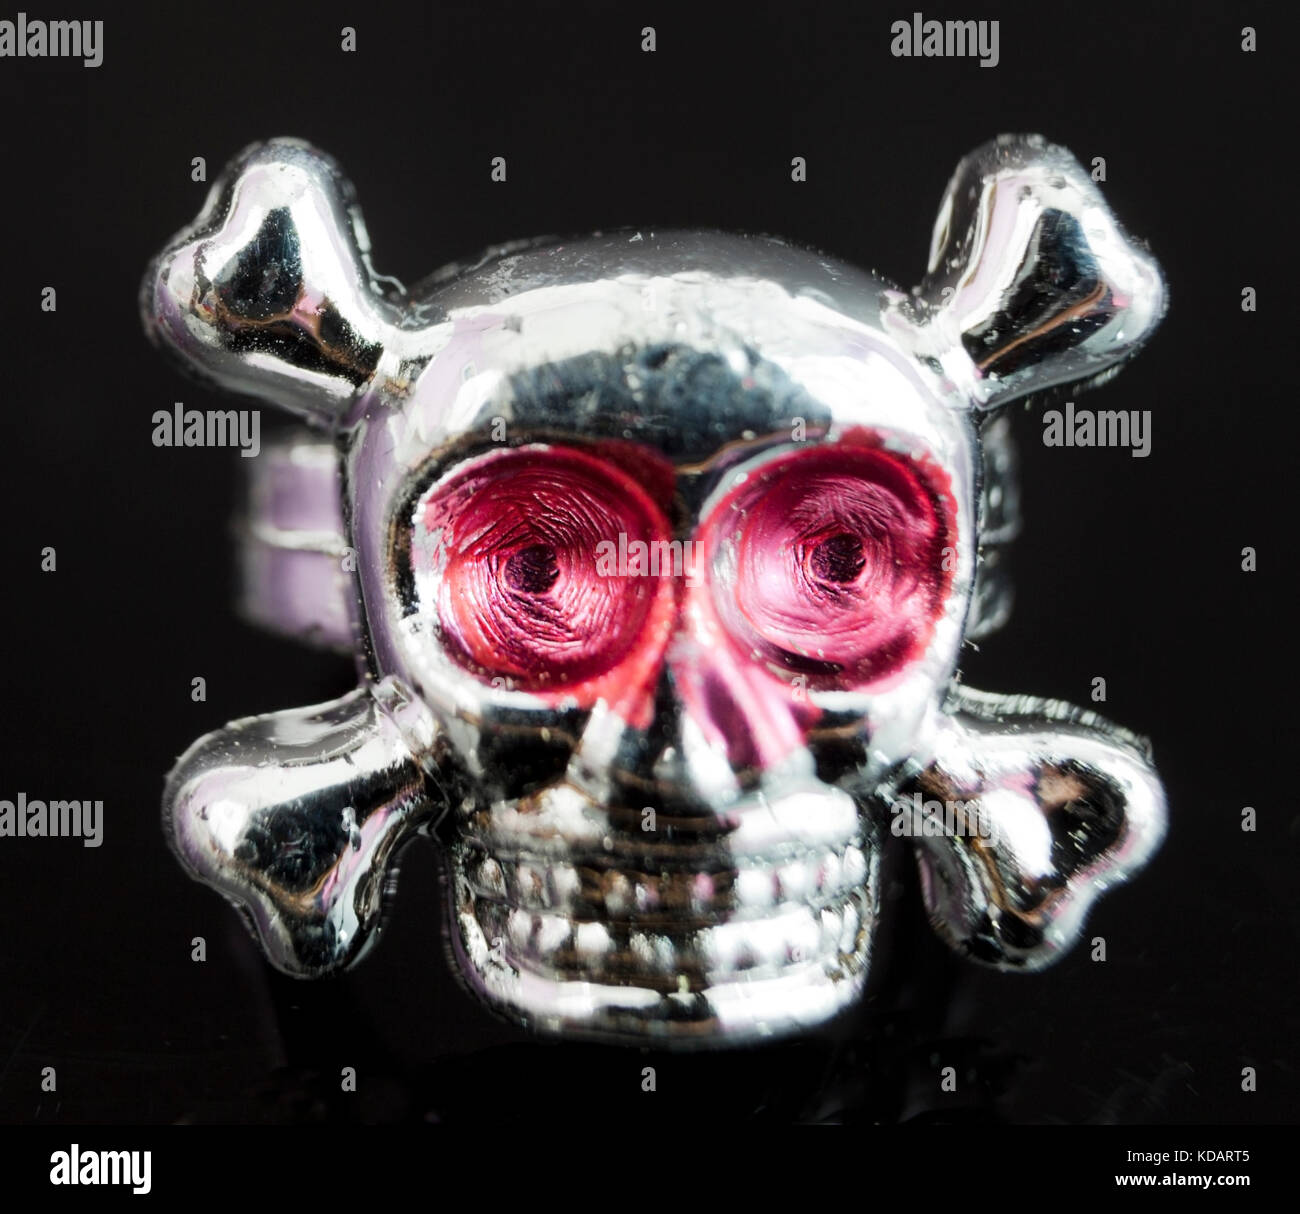 Close up of toy plastic silver skull and crossbones ring on black background. Stock Photo